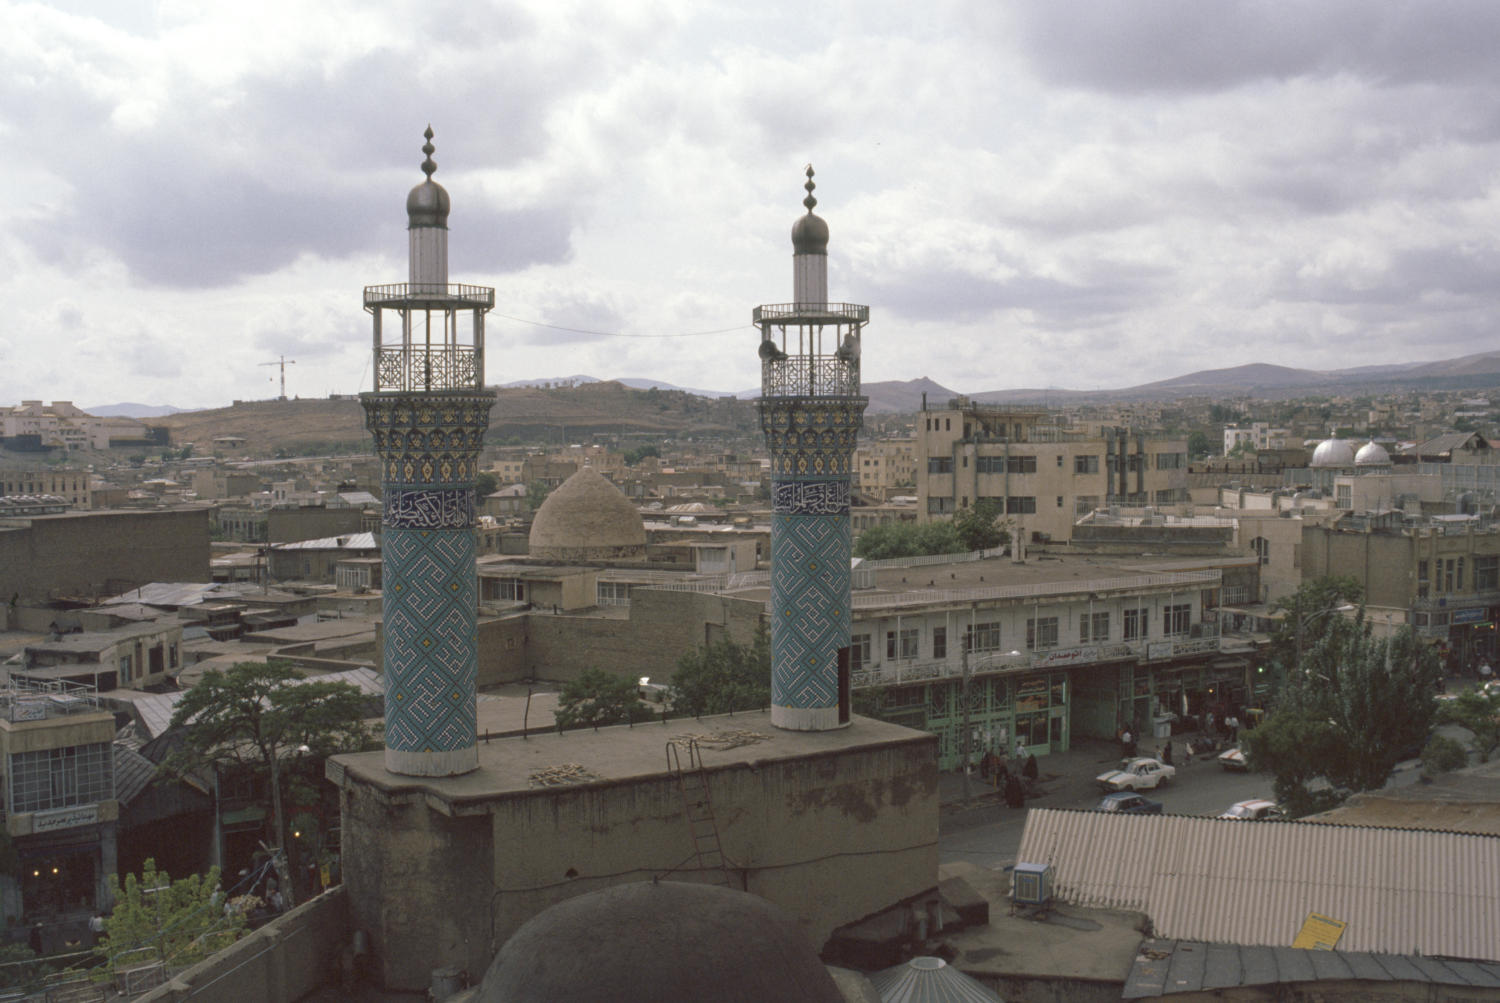 View of minarets above entrance portal, with Hamadan cityscape in distance.